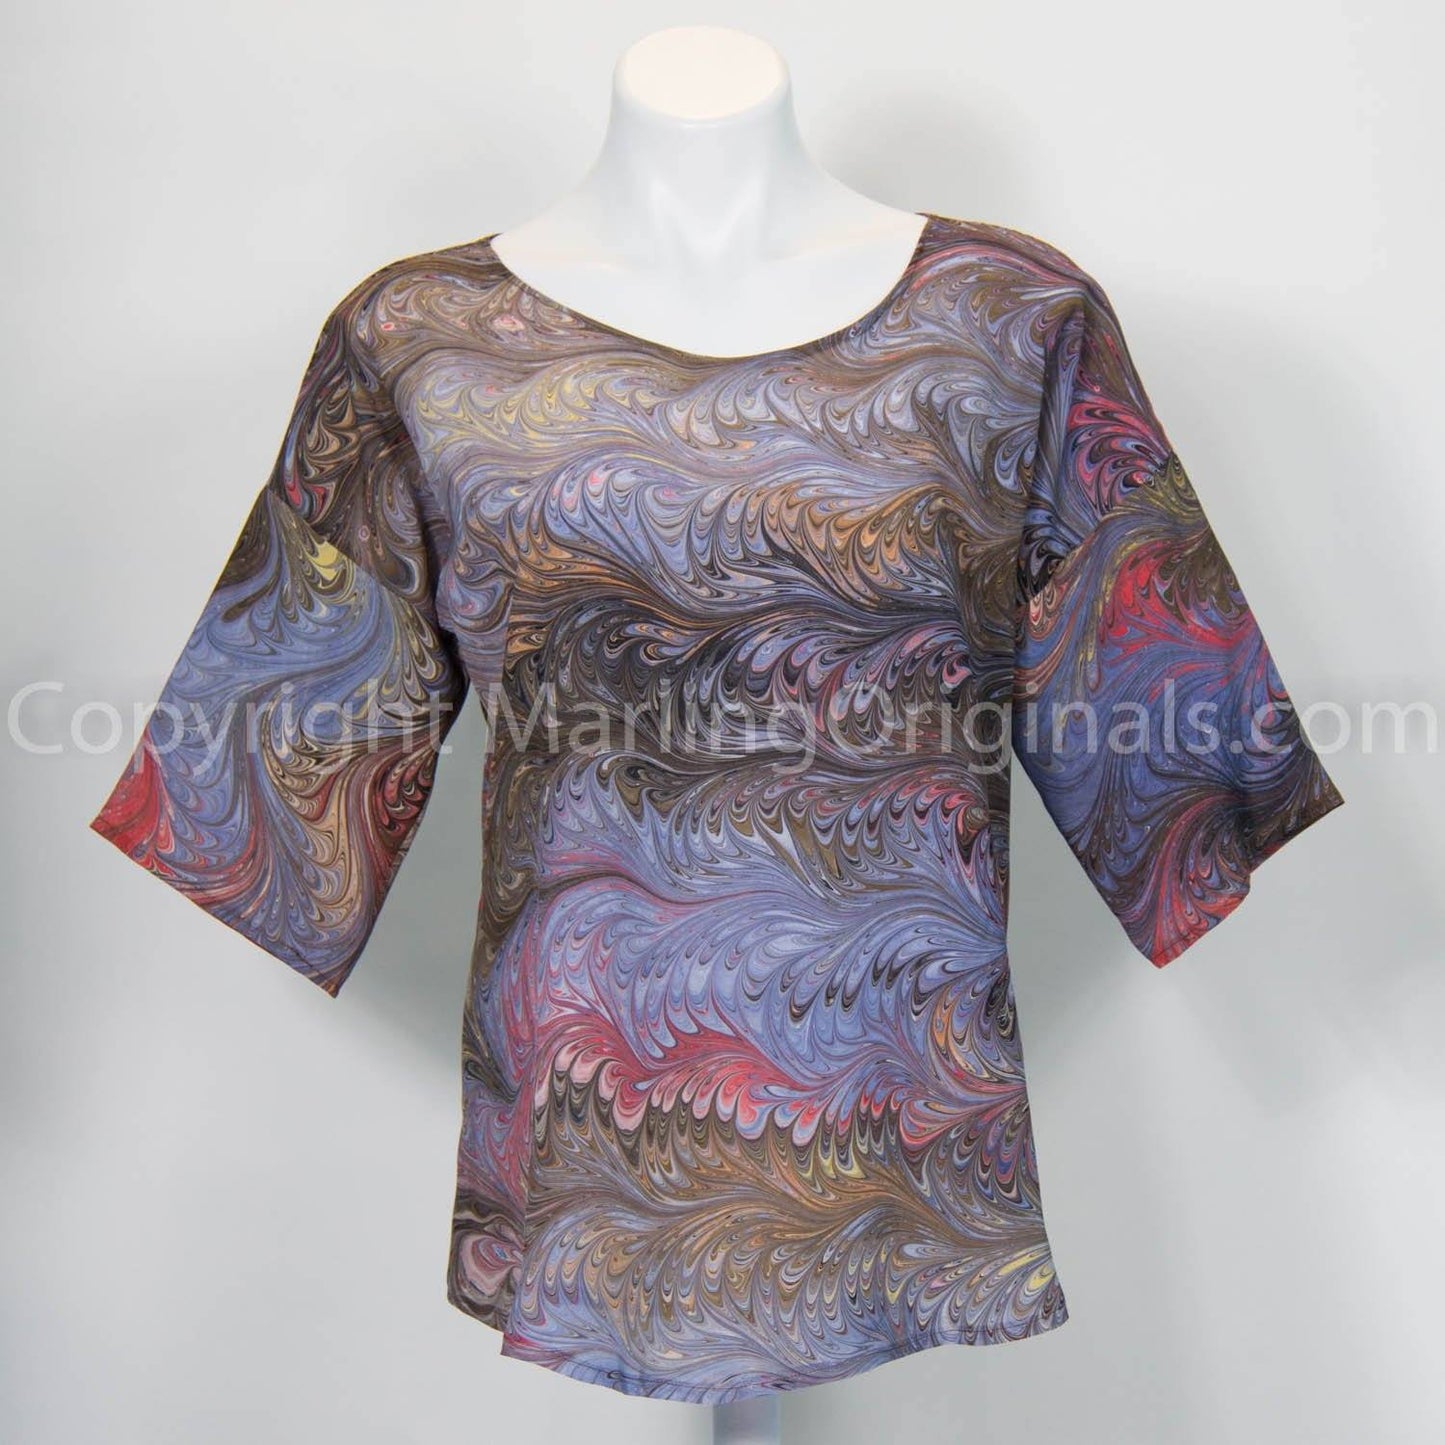 Marbled brown blouse has tones of grey, brown, red and black.  Half sleeve, round neck. 